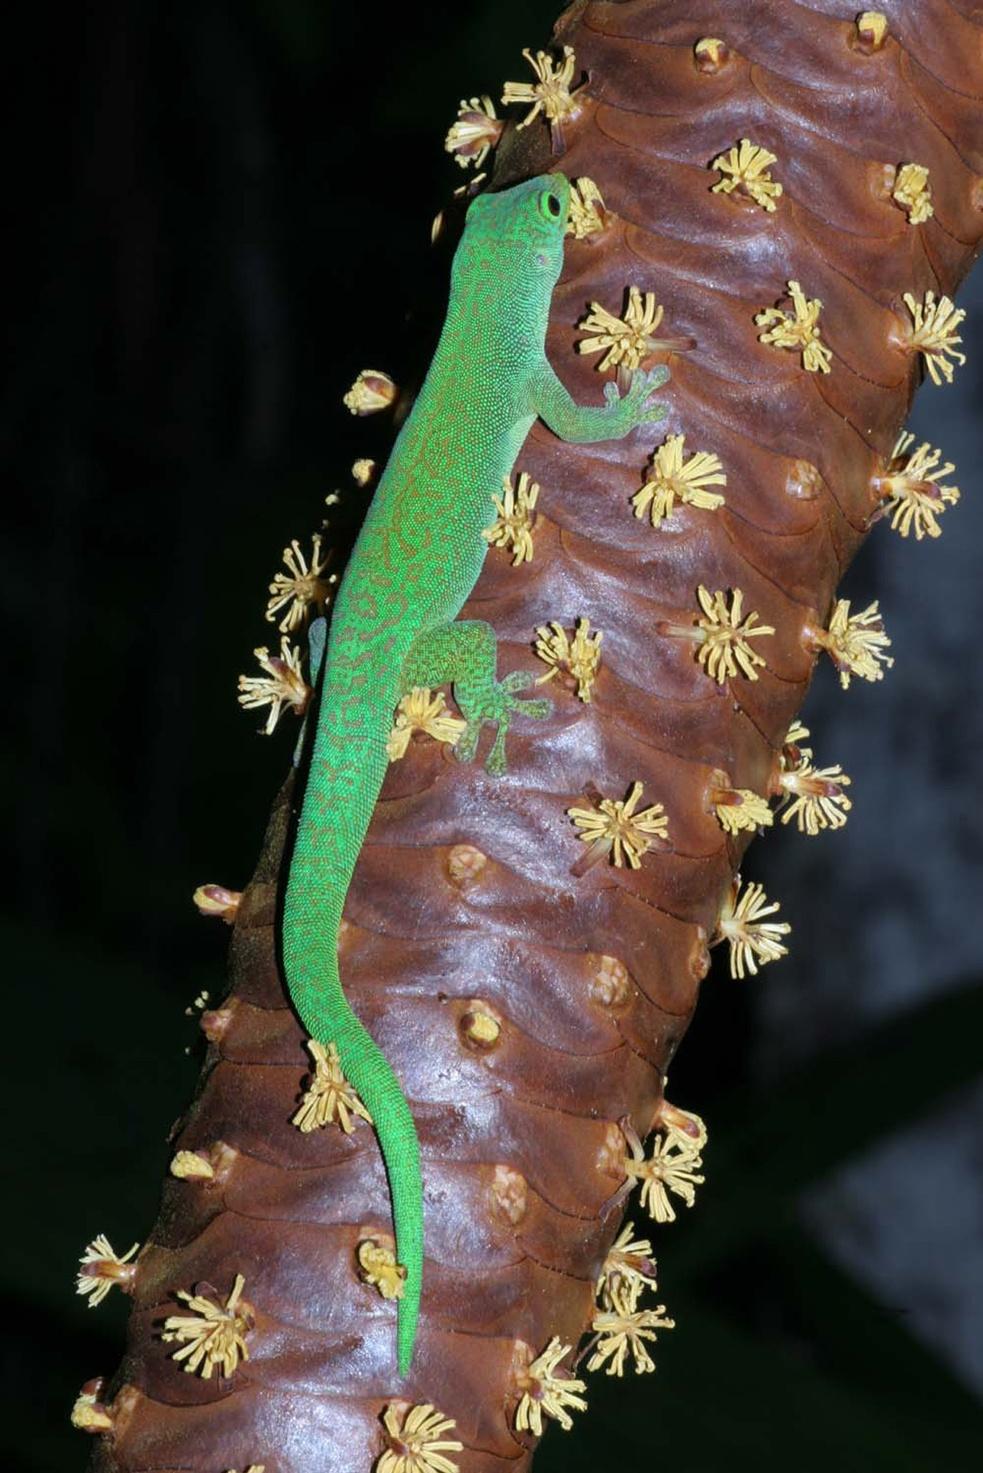 Phylogeography and diversification history of the day-gecko genus Phelsuma in